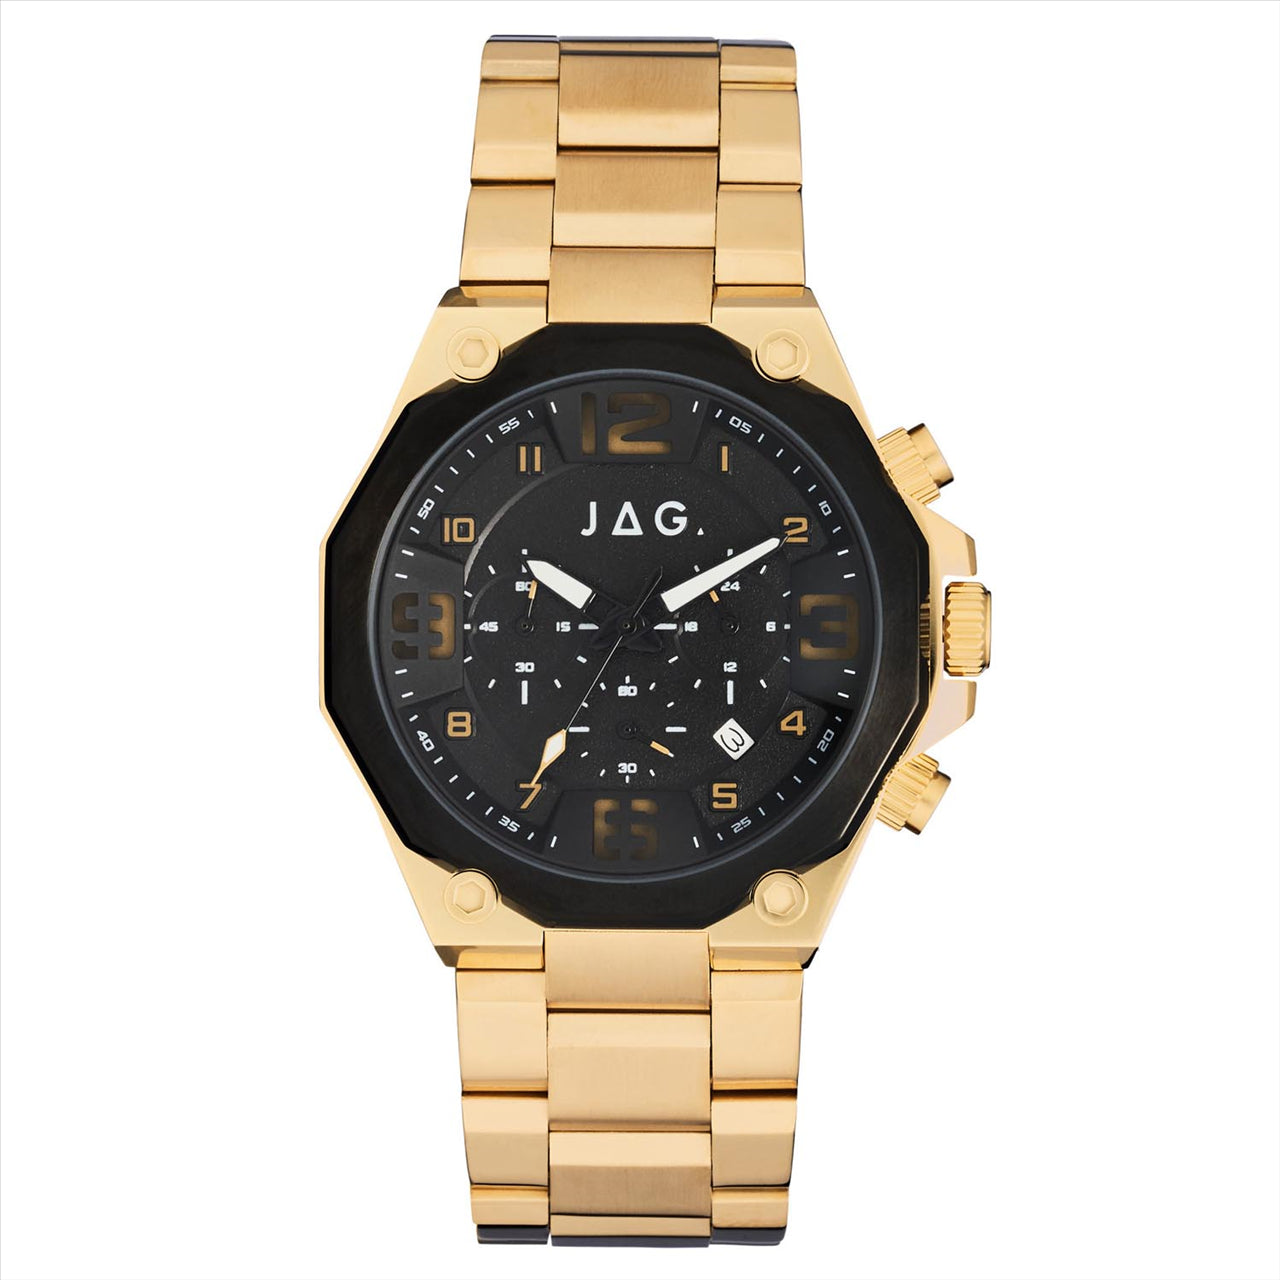 Gents Gold Plated JAG Watch